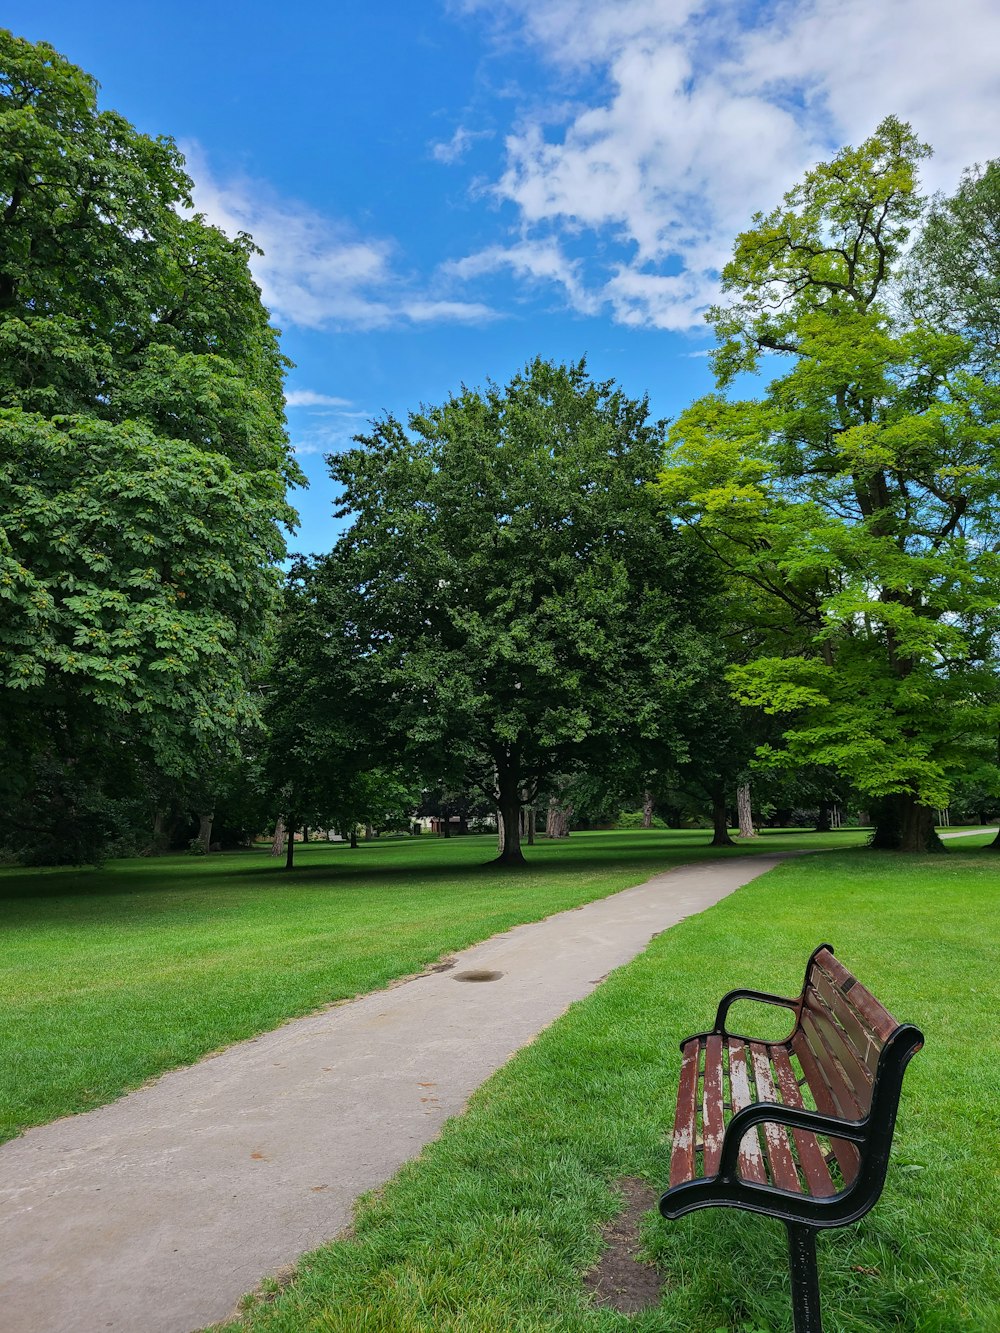 brown wooden bench near green trees under blue sky during daytime